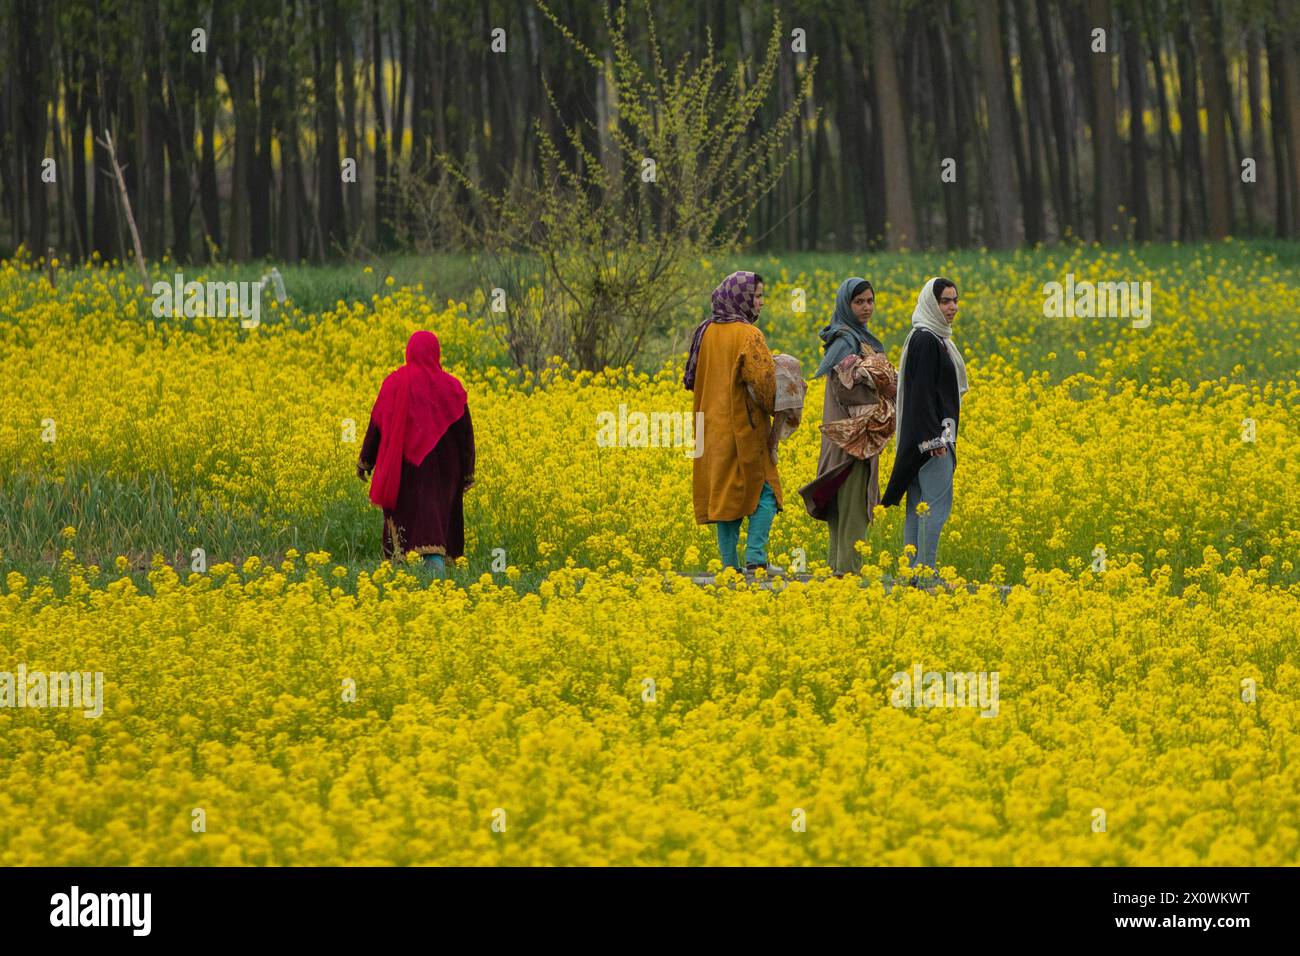 Kashmiri women walk through the blooming mustard fields during the spring season in Pulwama, south of Srinagar. The spring season in Kashmir valley is a period of two long months starting from mid-March and ends in mid-May. According to the Directorate of Agriculture of the state government of Jammu and Kashmir, the Kashmir valley comprising six districts has an estimated area of 65 thousand hectares of paddy land under mustard cultivation, which is about 40 per cent of the total area under paddy. (Photo by Faisal Bashir/SOPA Images/Sipa USA) Stock Photo